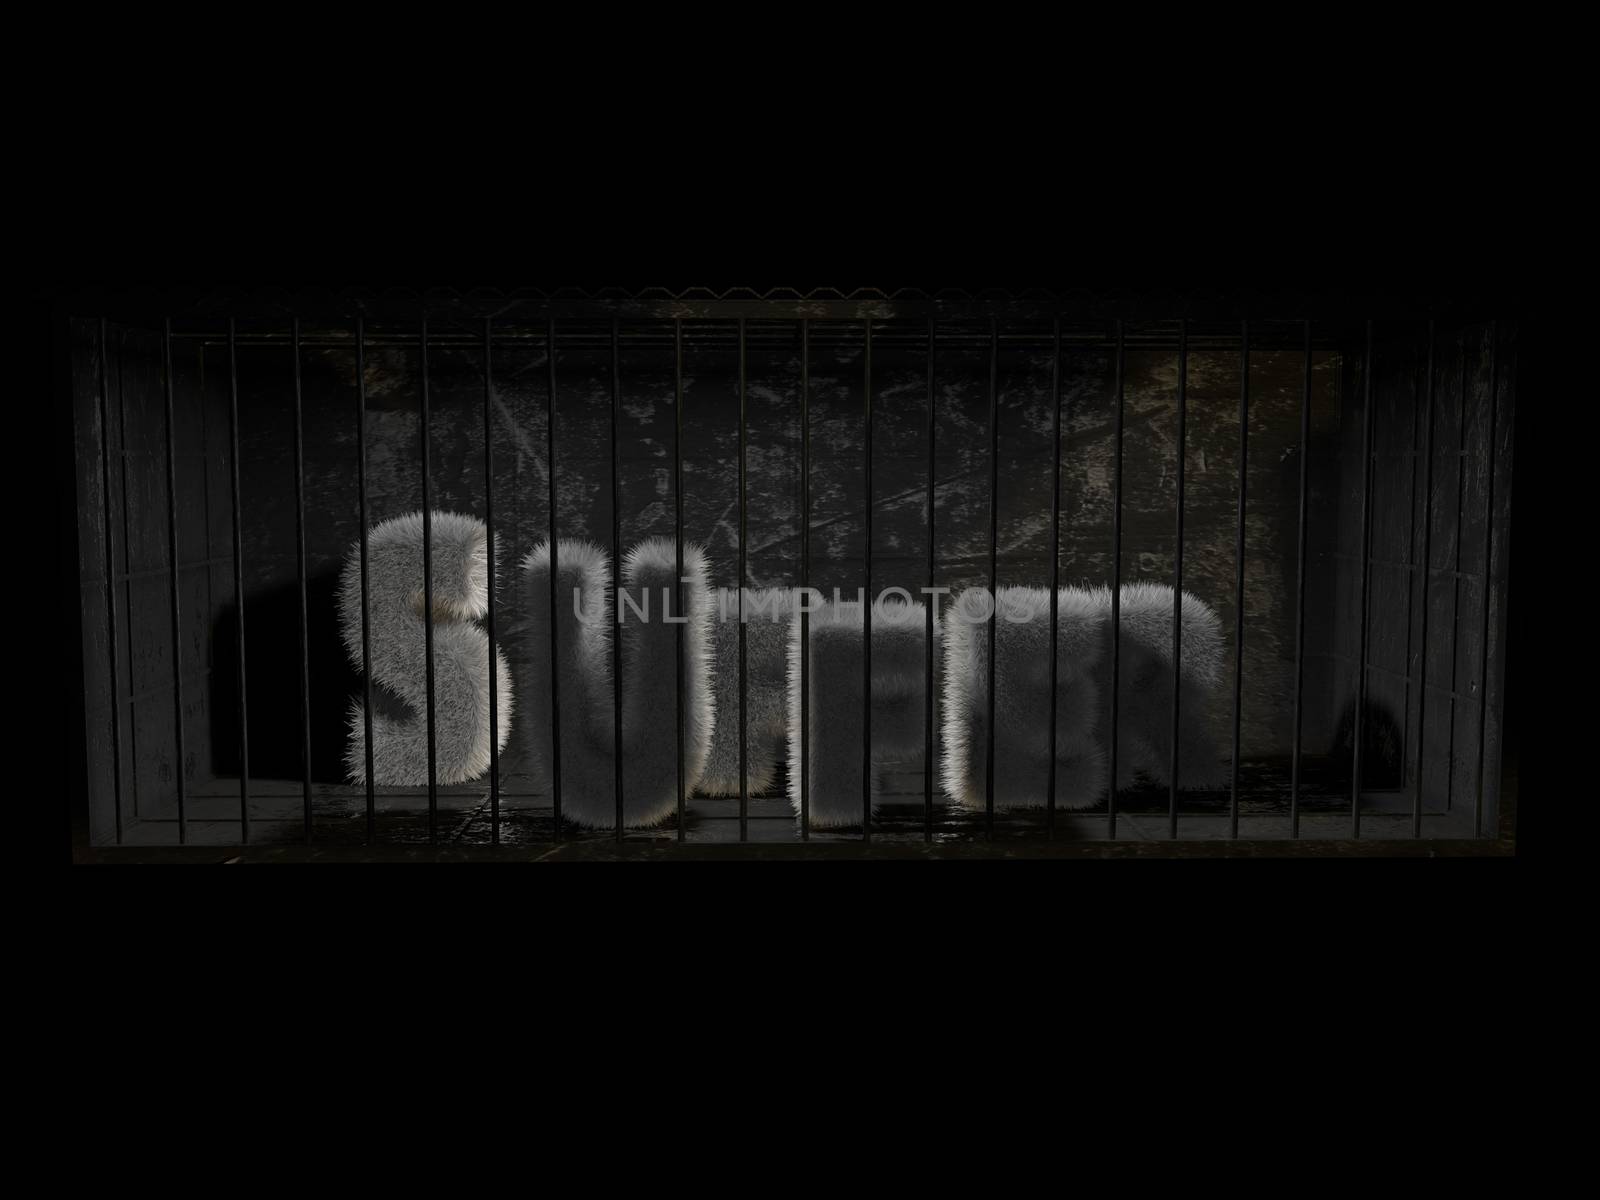 A fluffy word (suffer) with white hair behind bars with black background.